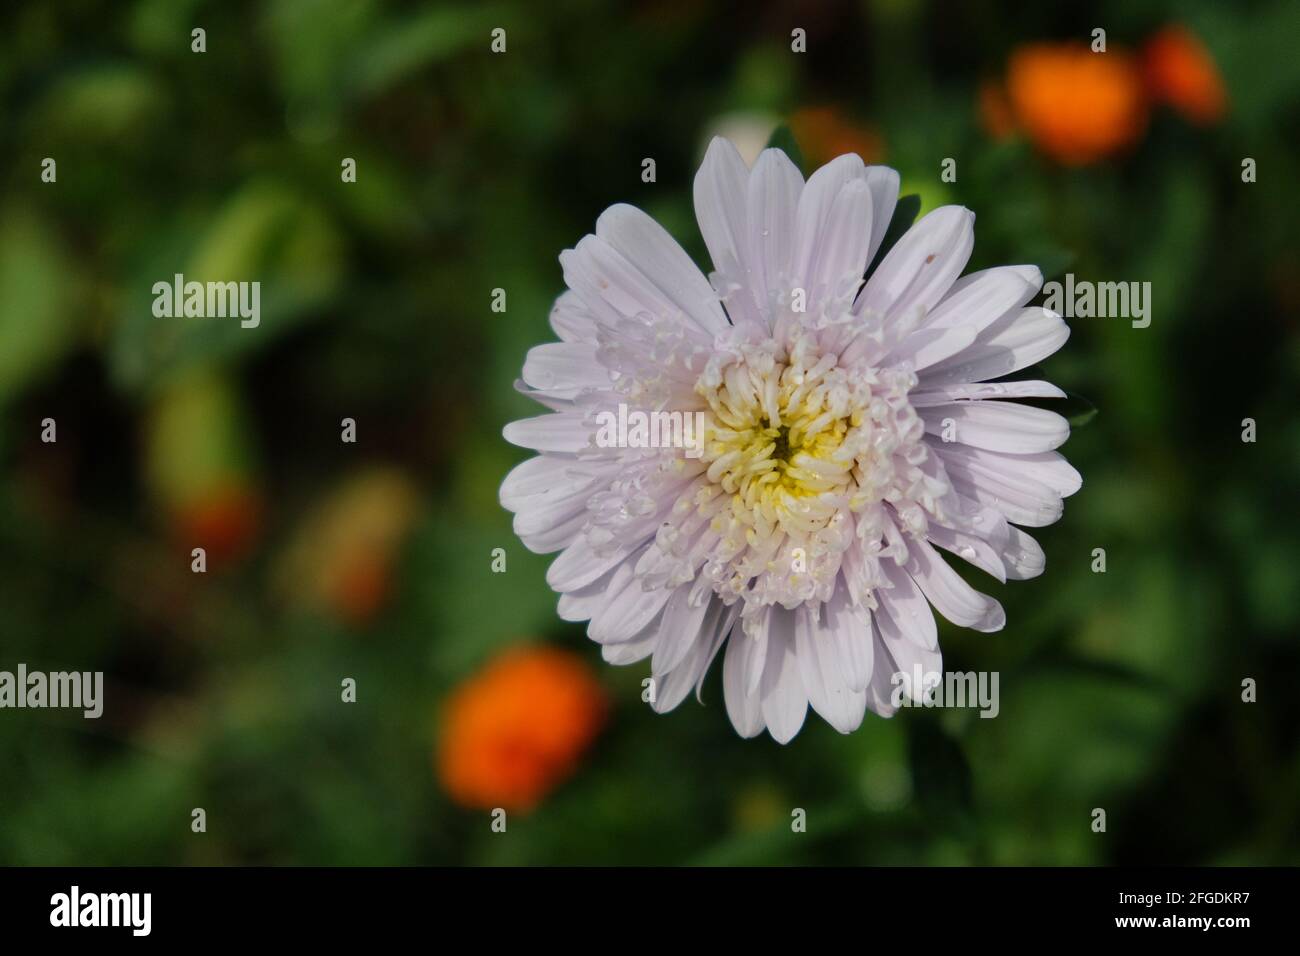 Single flower of a white chrysanthemum on a blurred background, close-up. Dew drops on flower petals. Stock Photo